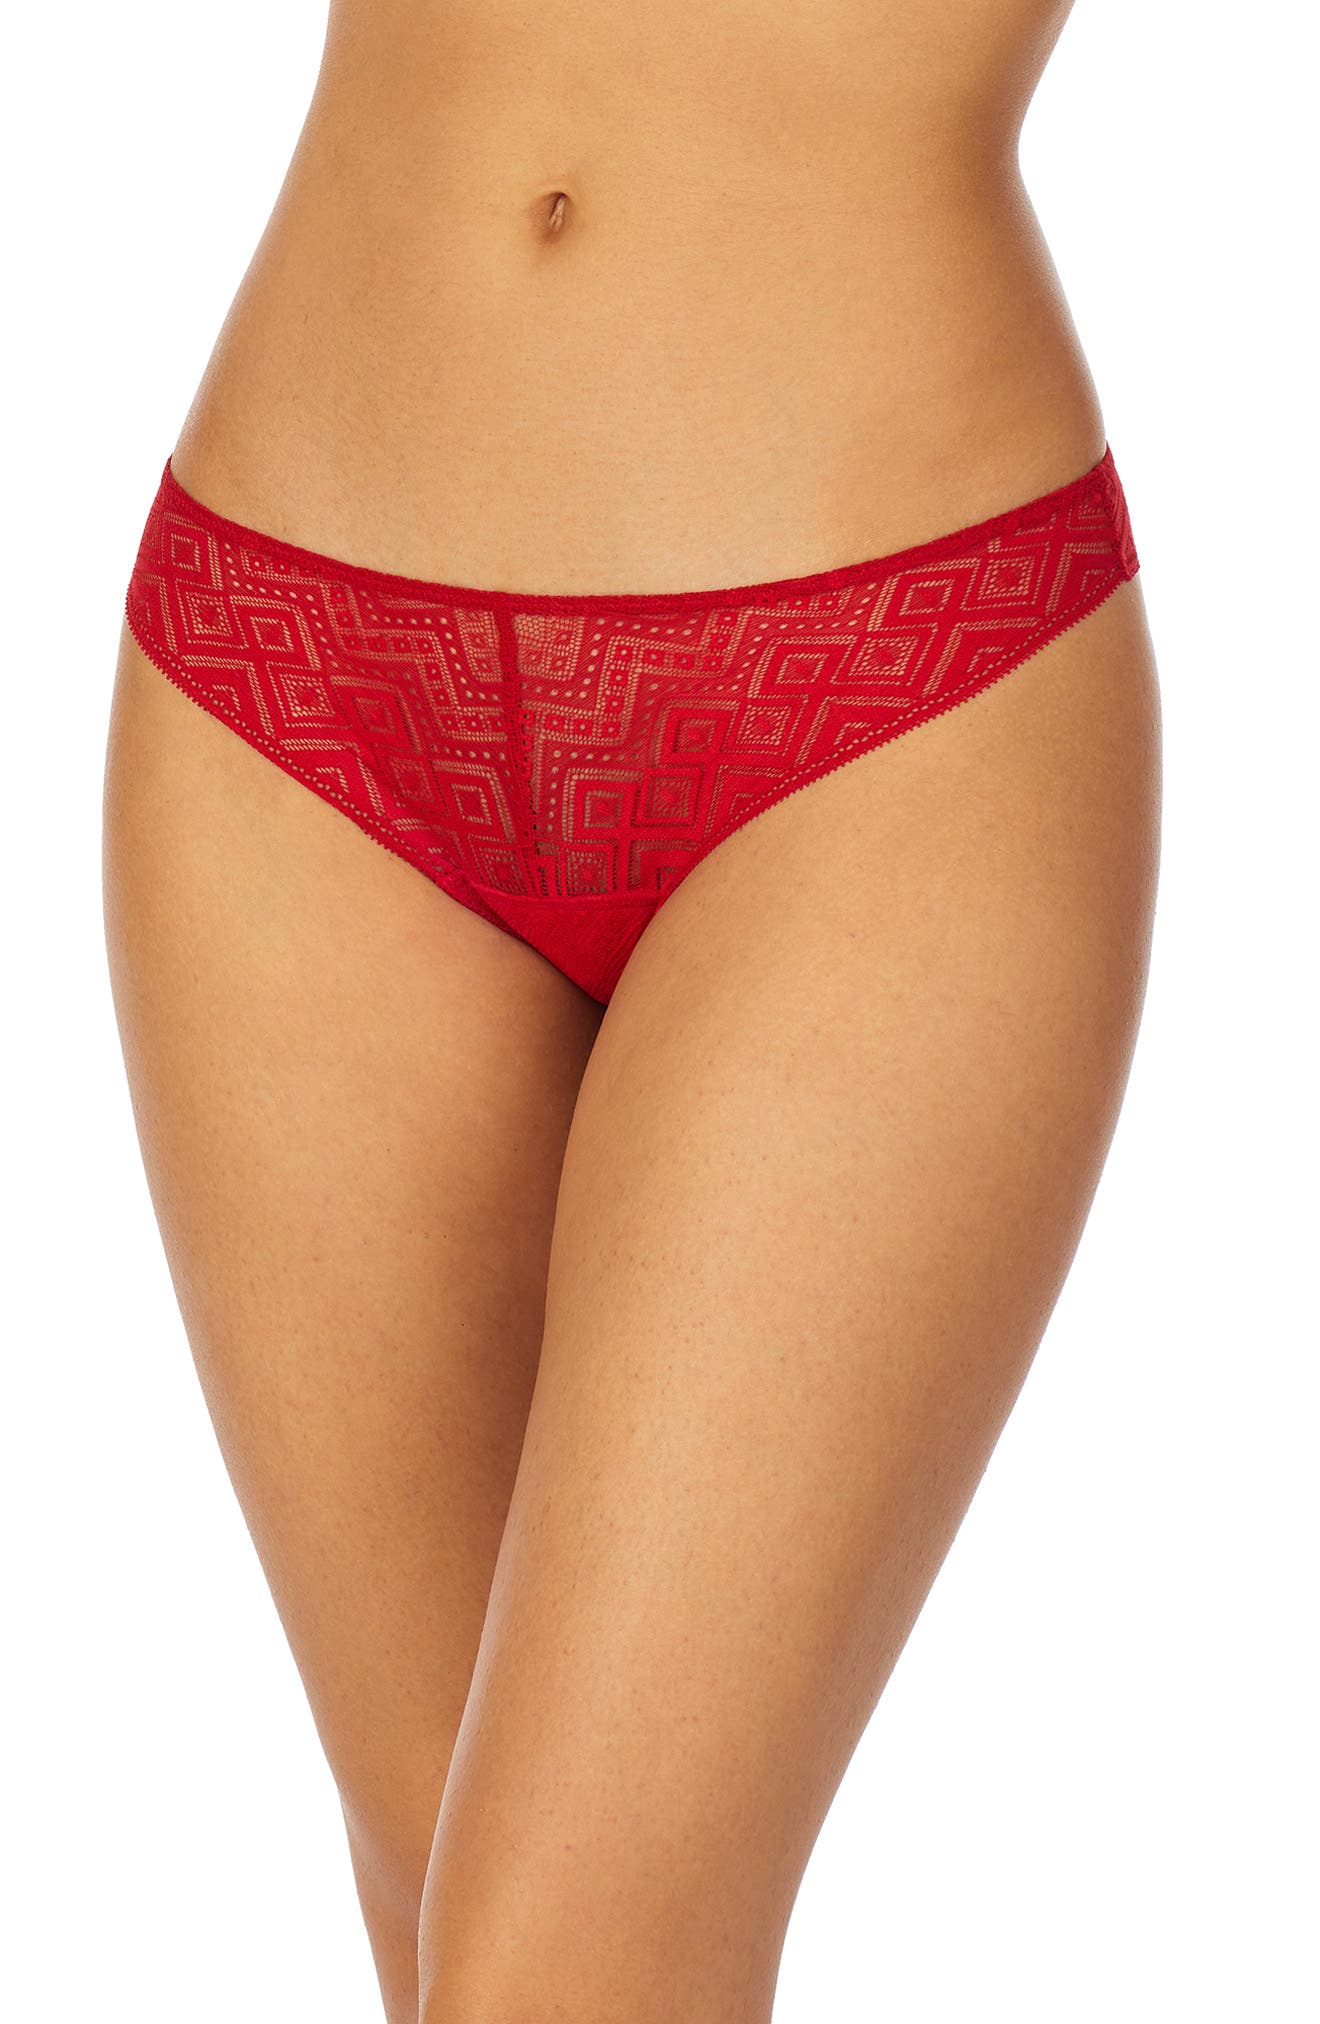 DKNY Pure Lace Thong in Brick at Nordstrom, Size Large